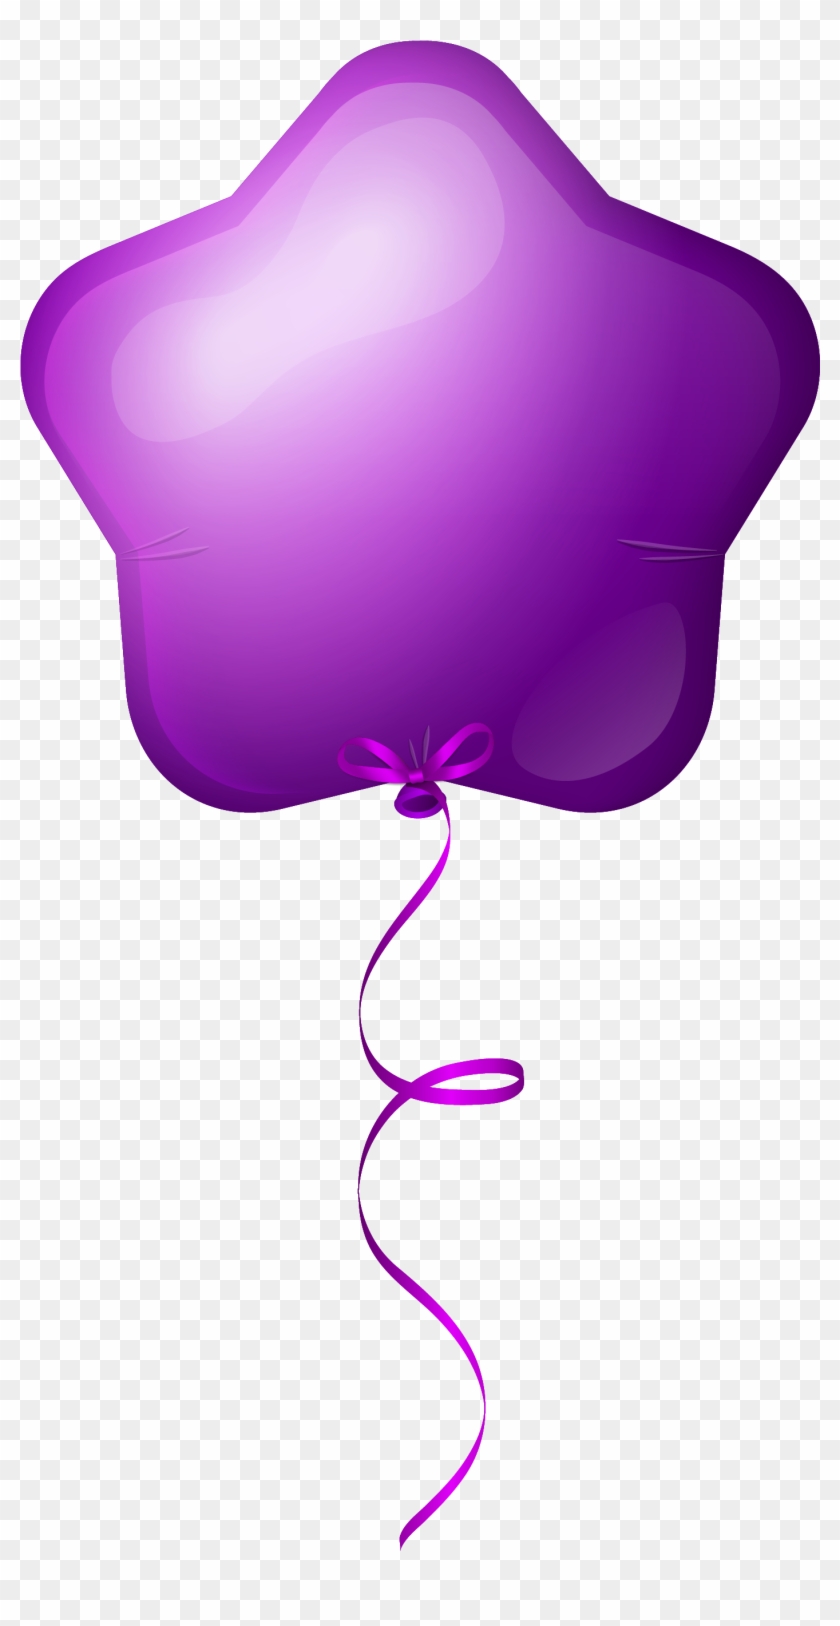 Clip Arts Related To - Clip Art Balloon Png #77116